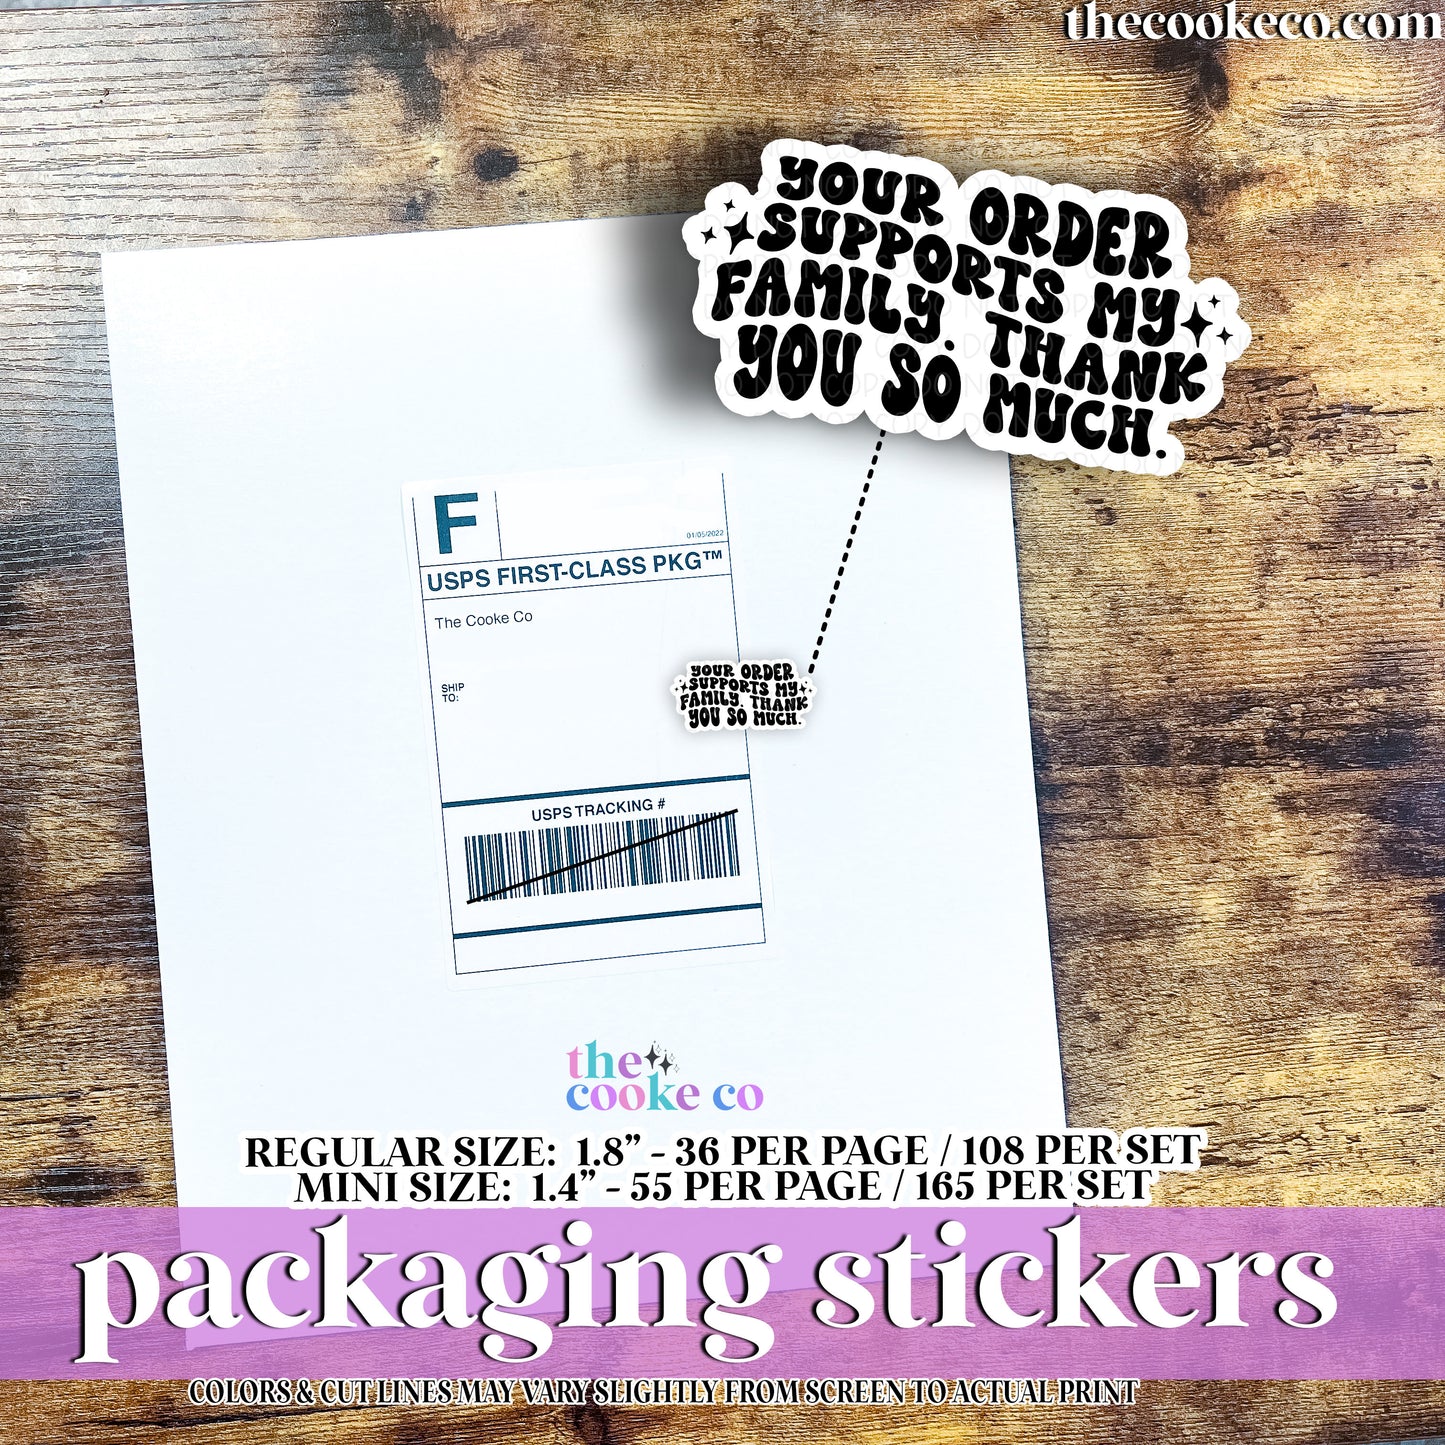 Packaging Stickers | #BW0247 - SUPPORTS MY FAMILY